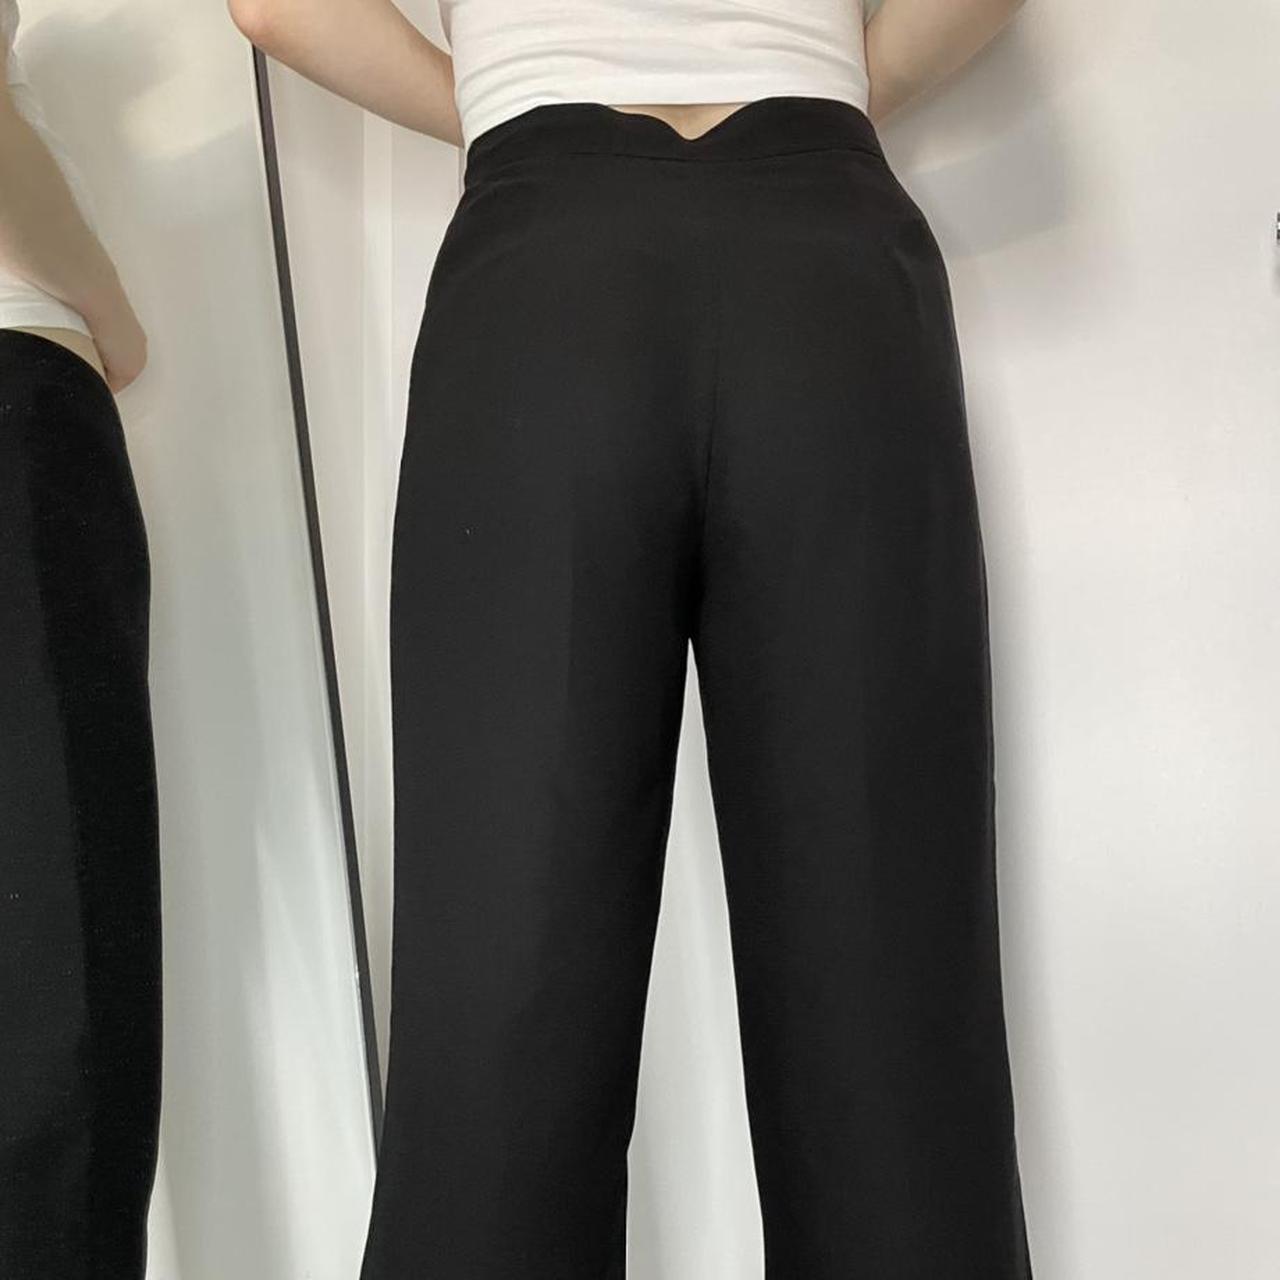 Product Image 3 - Petite black trousers

In excellent vintage